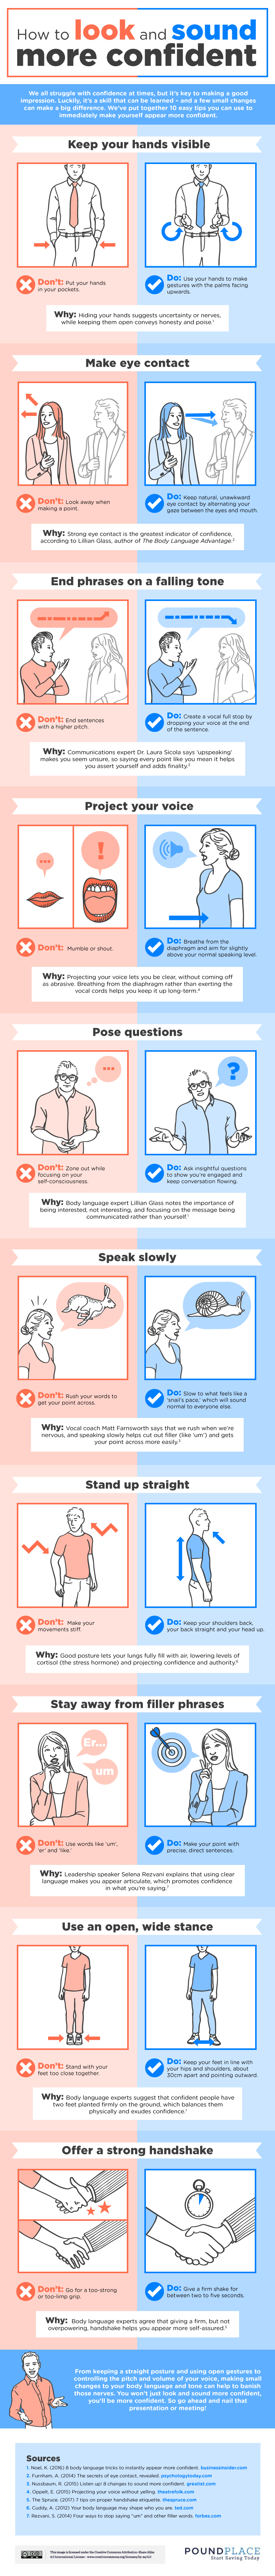 How To Look And Sound More Confident - infographic